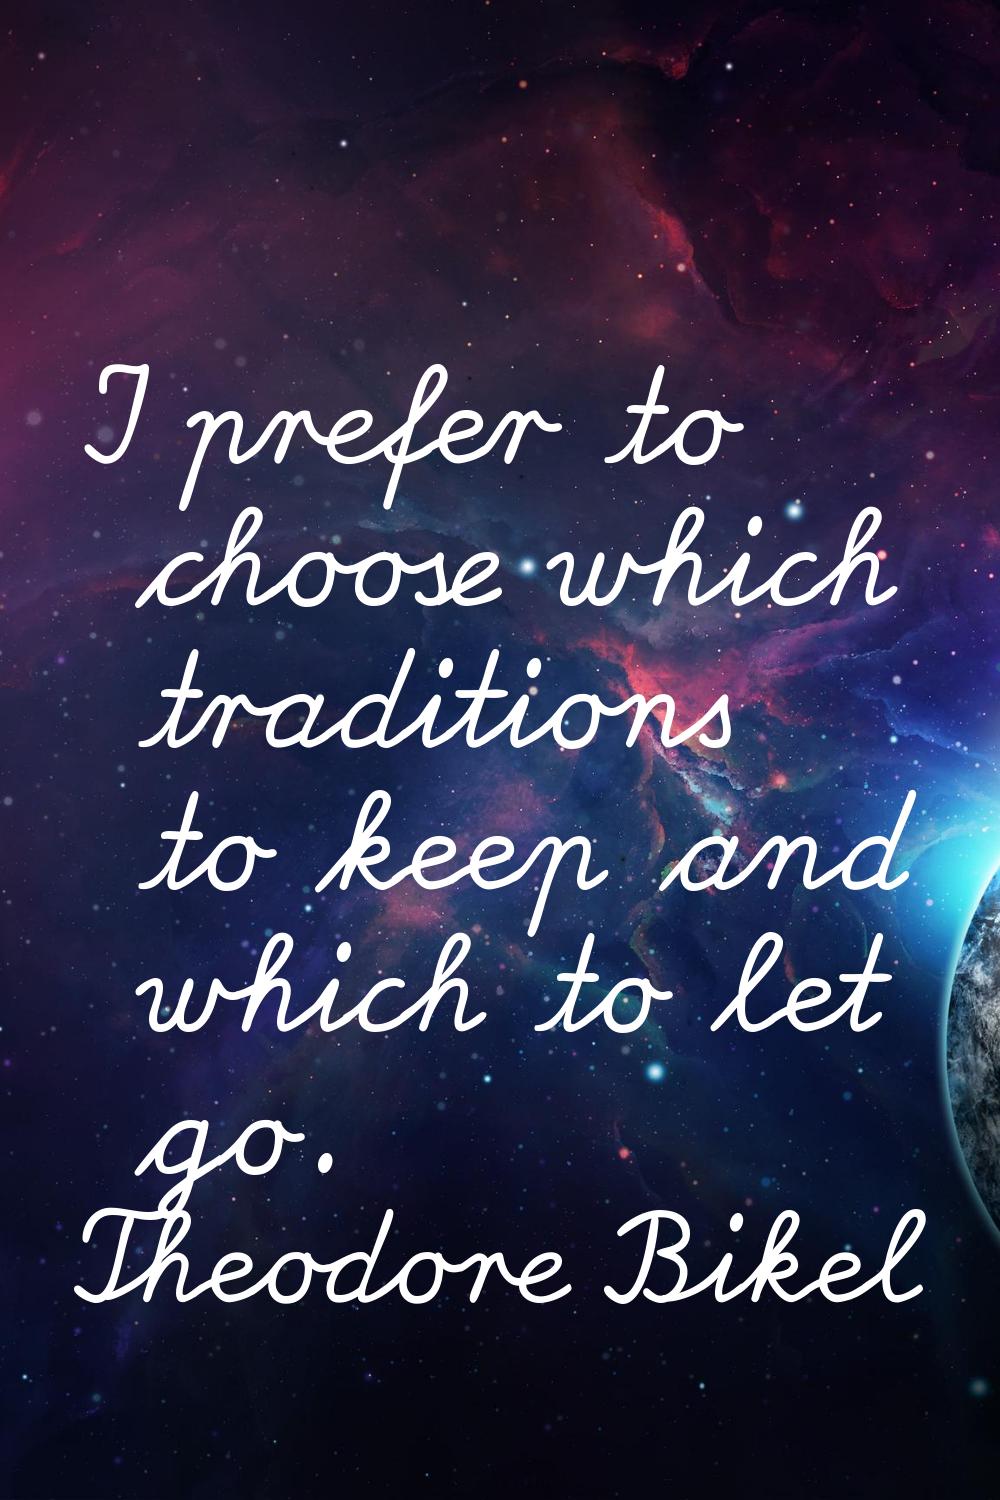 I prefer to choose which traditions to keep and which to let go.